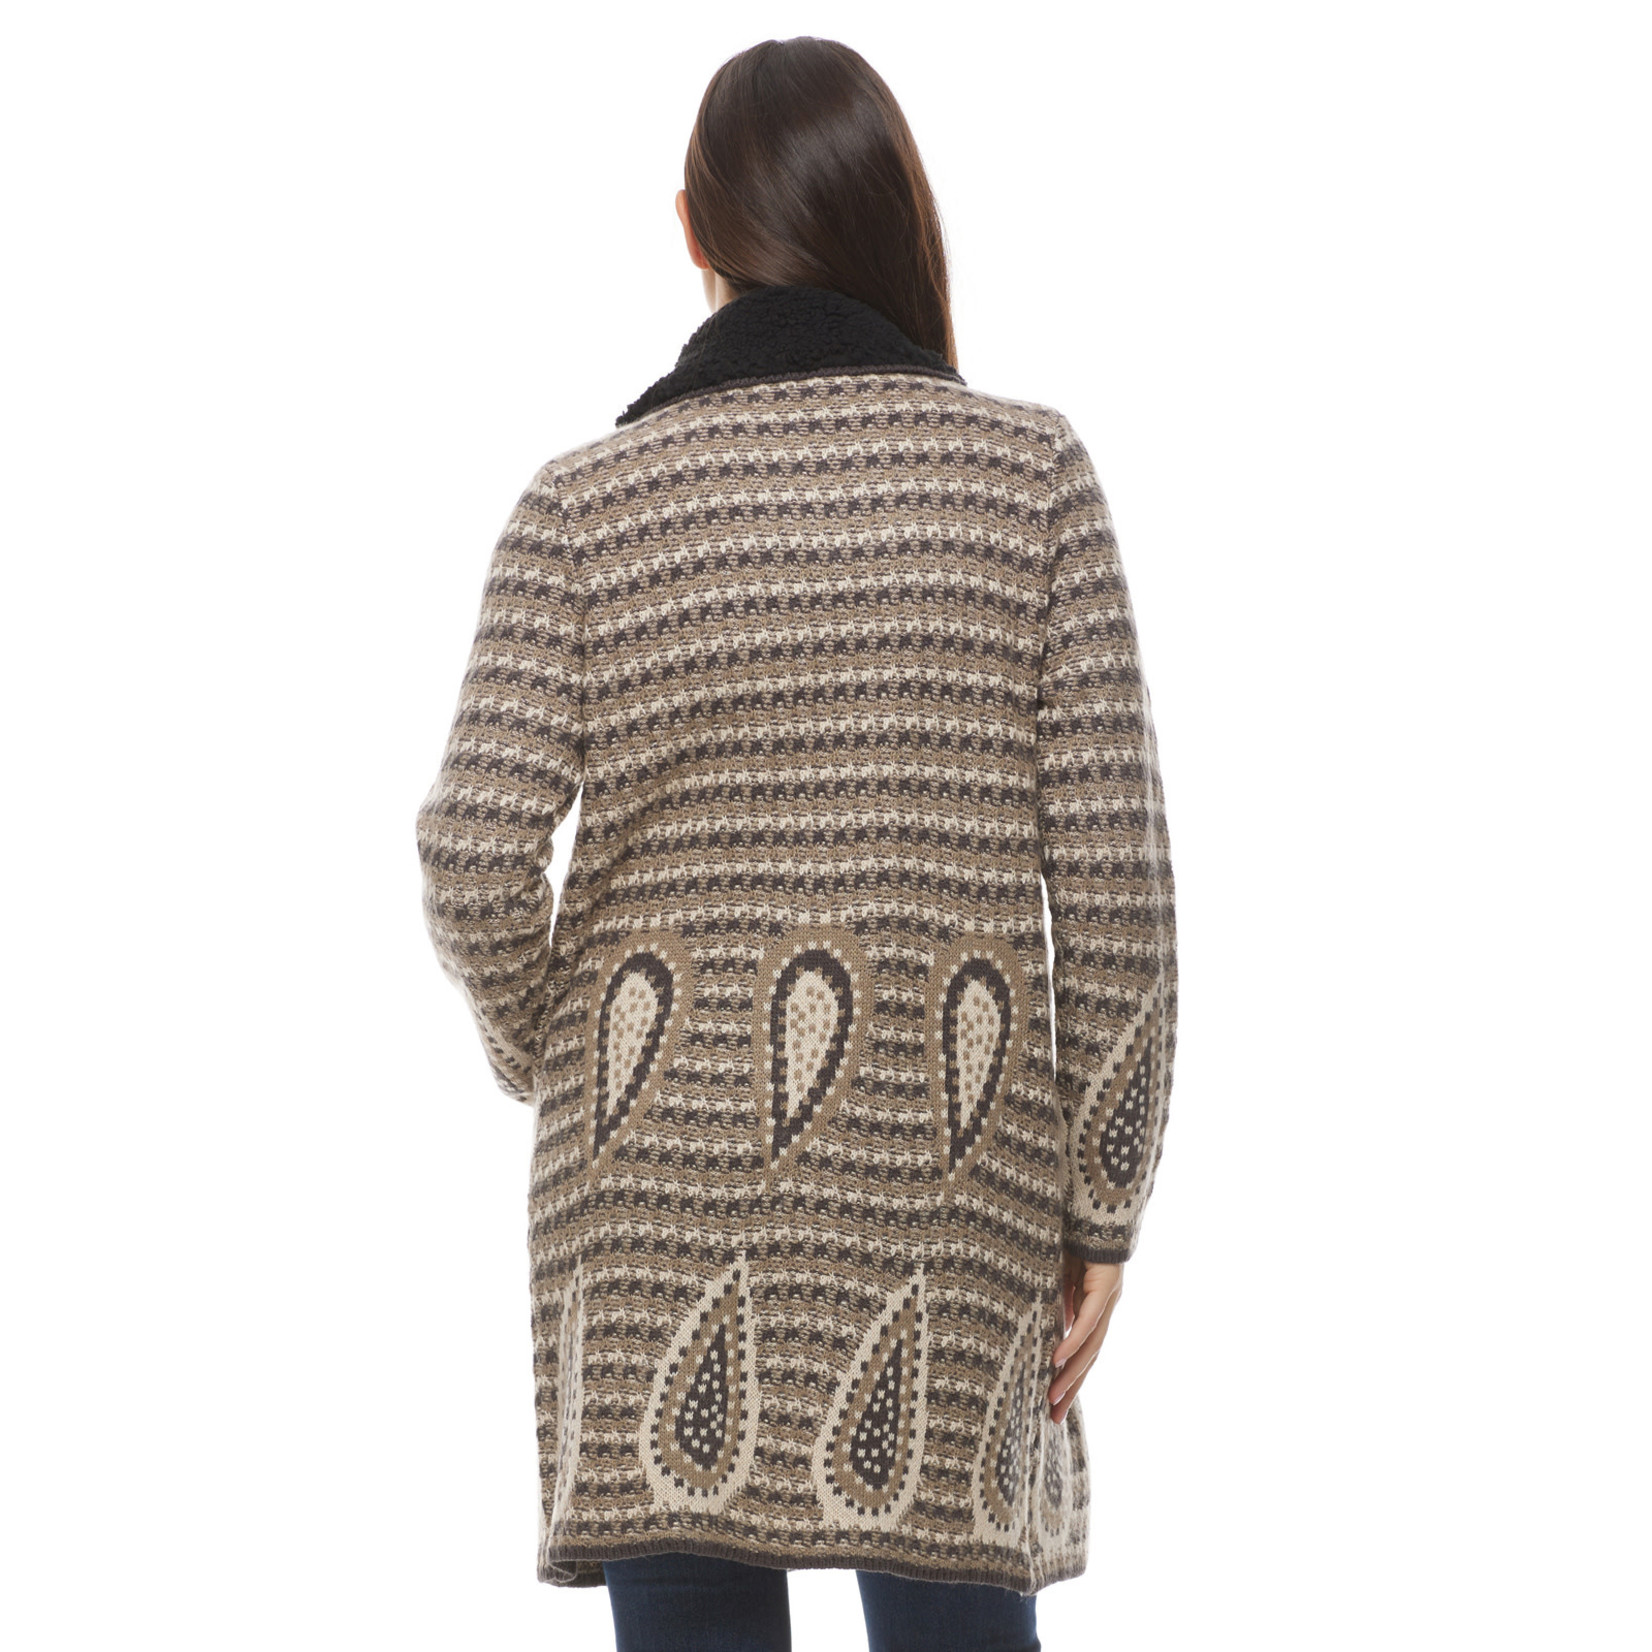 FDJ Sweater Coat in Paisley Check